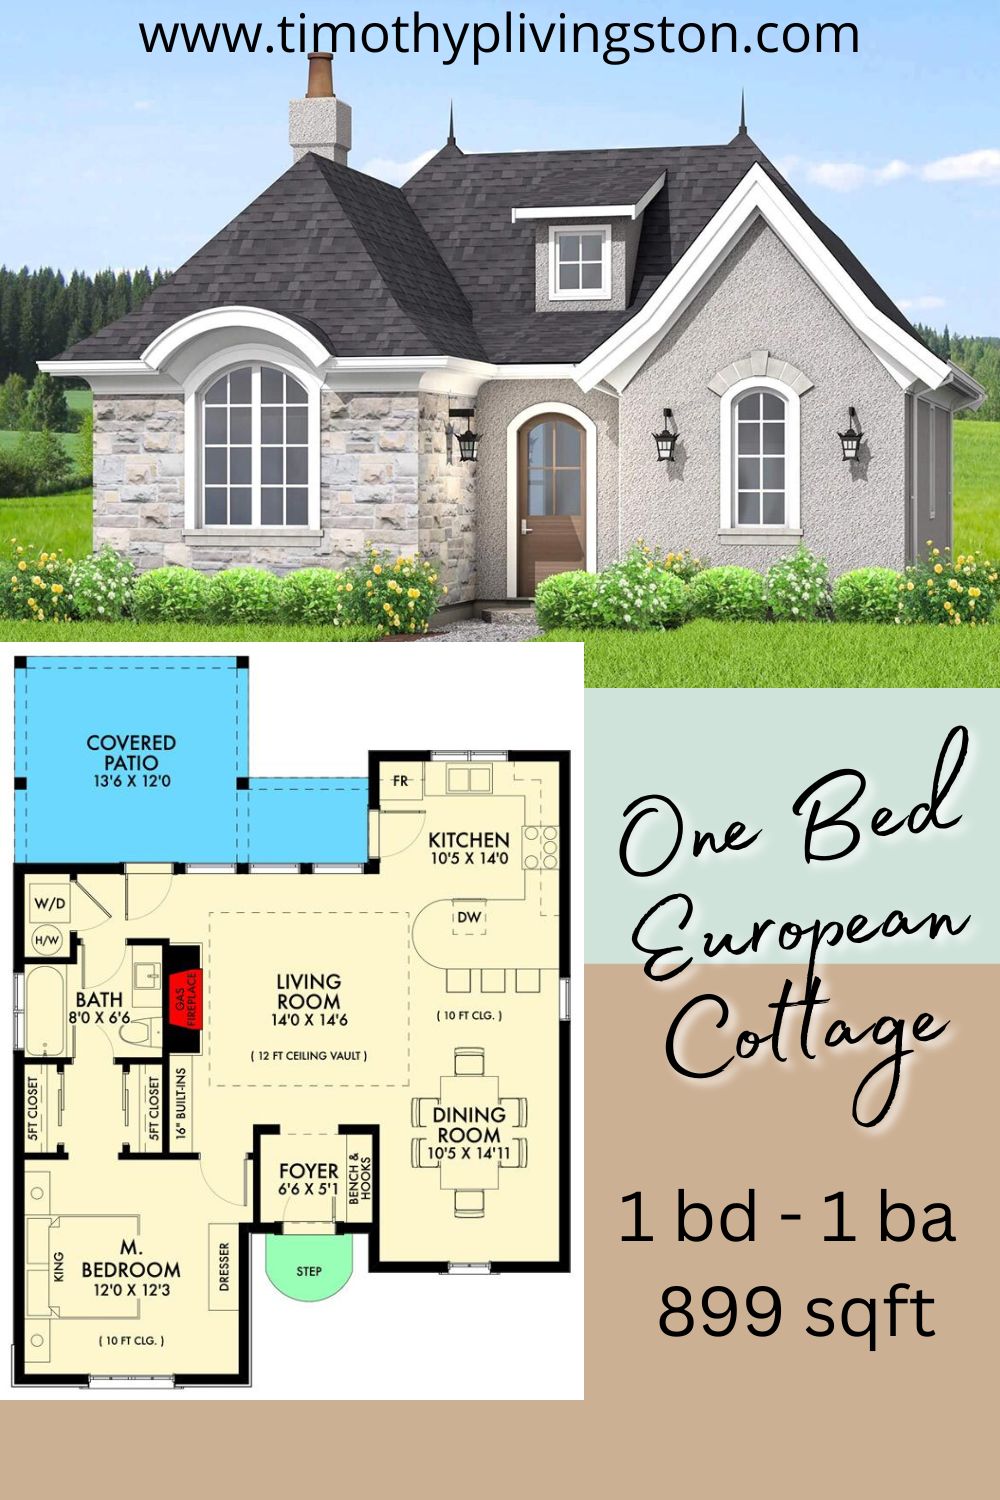 One Bed European Cottage small house plans